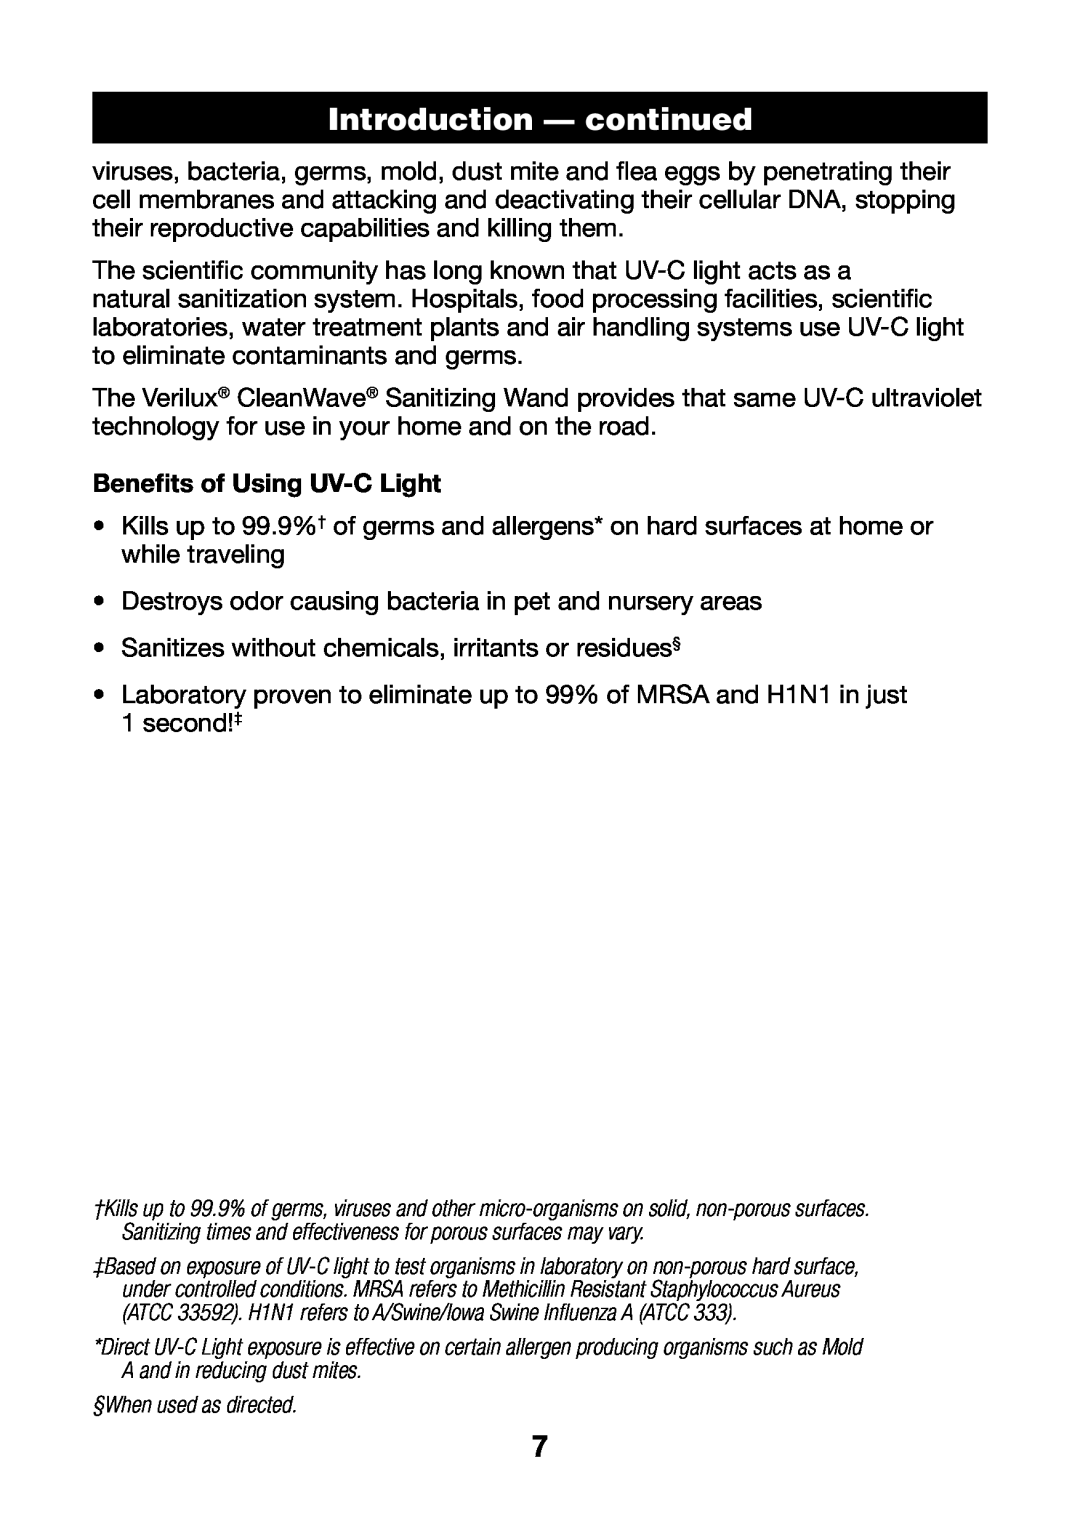 Verilux VH01 manual Introduction - continued, Benefits of Using UV-C Light 